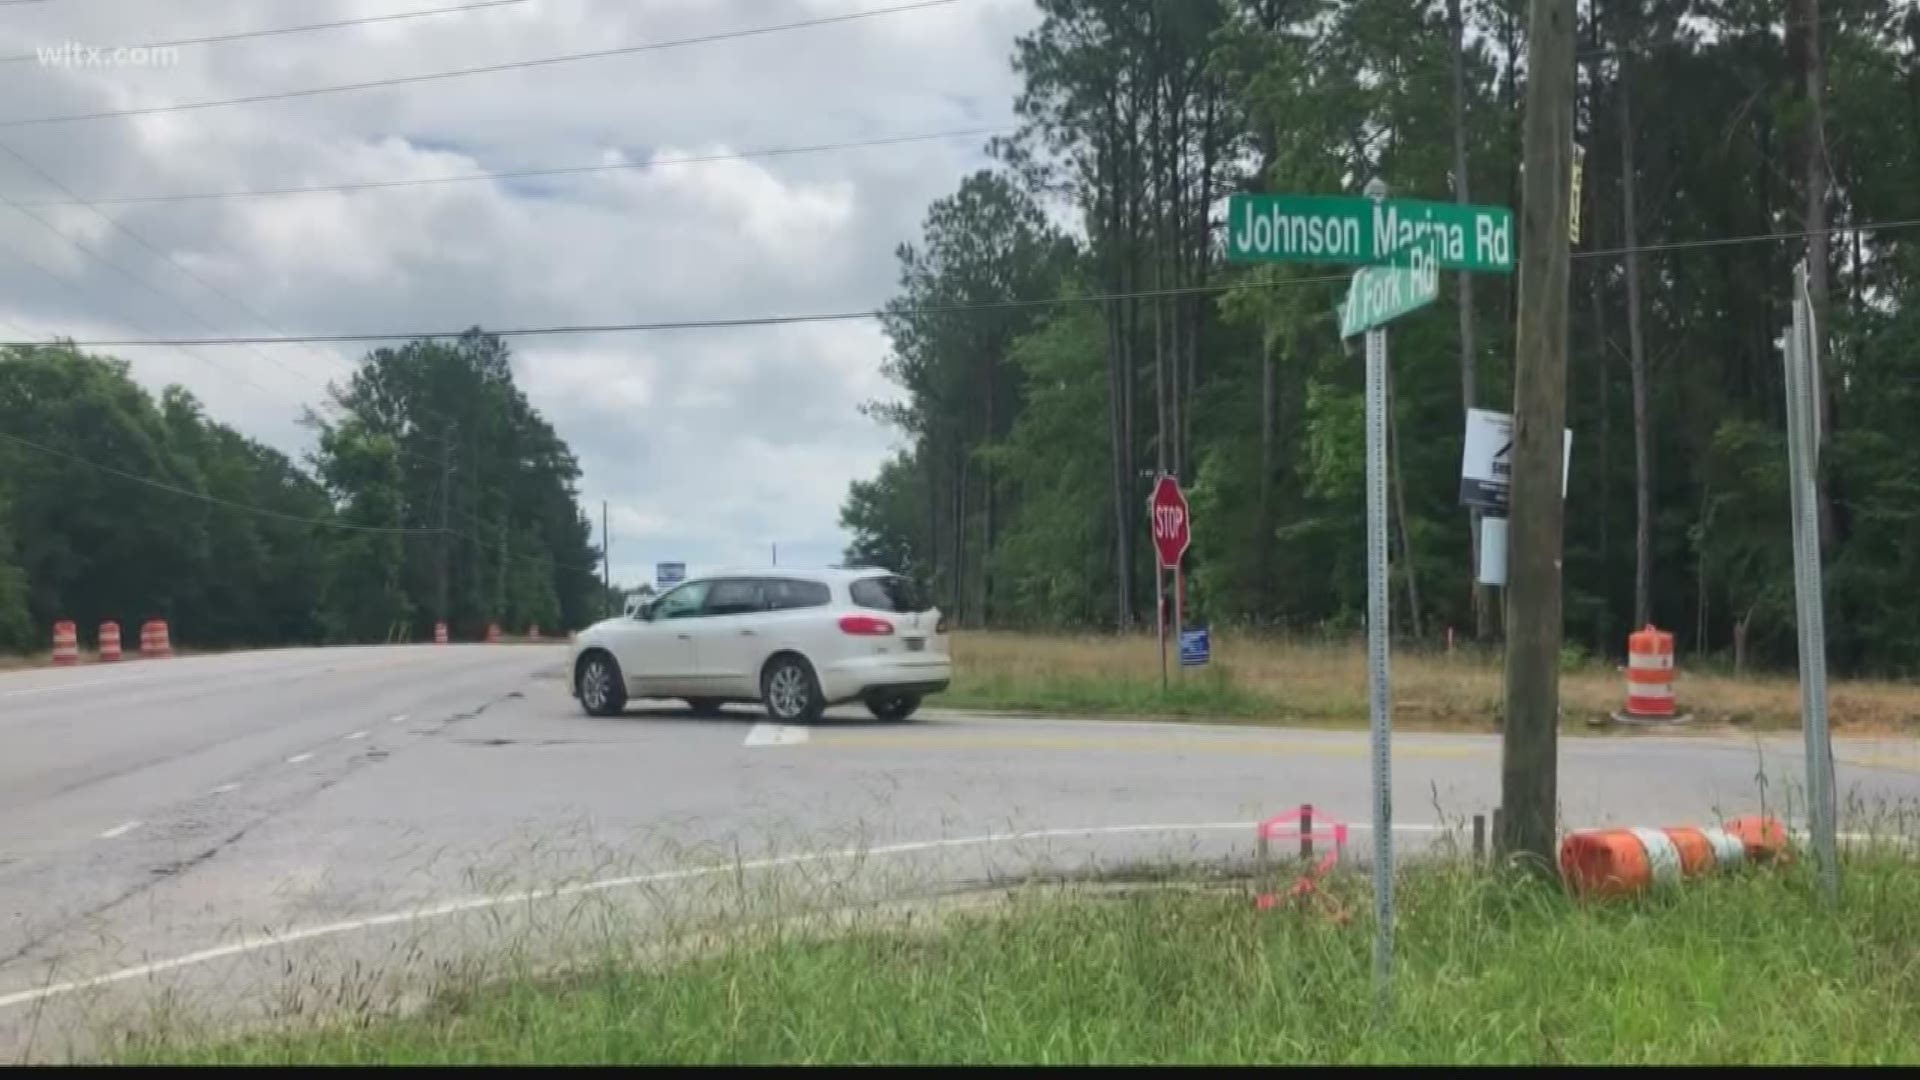 Engineers have been working on Dutch Fork Road and Johnson Marina Road for more than three years.